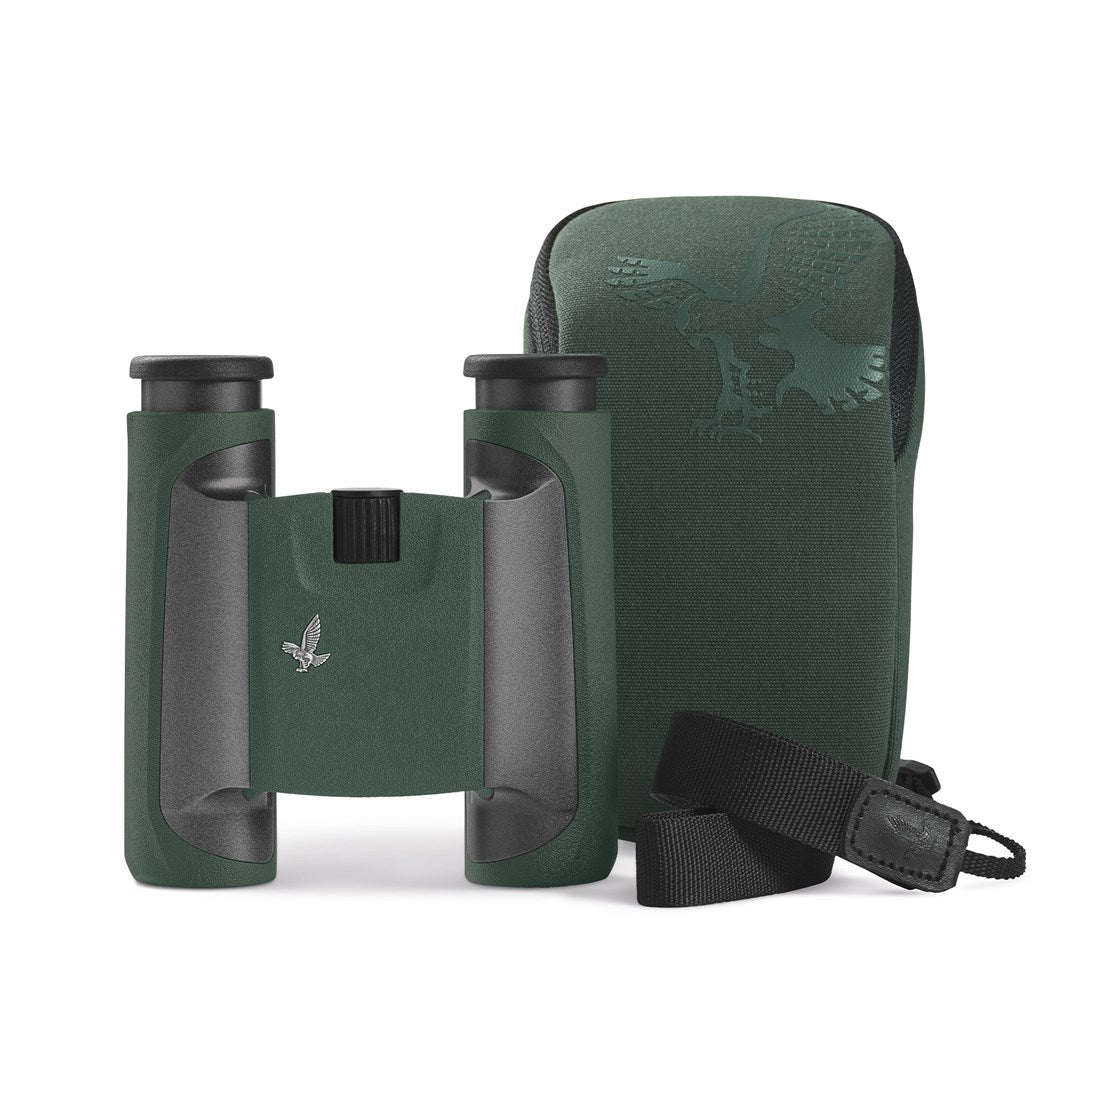 Swarovski CL 10x25 Pocket Binoculars Green with Wild Nature Accessory Pack - Front view of the binoculars and carry case